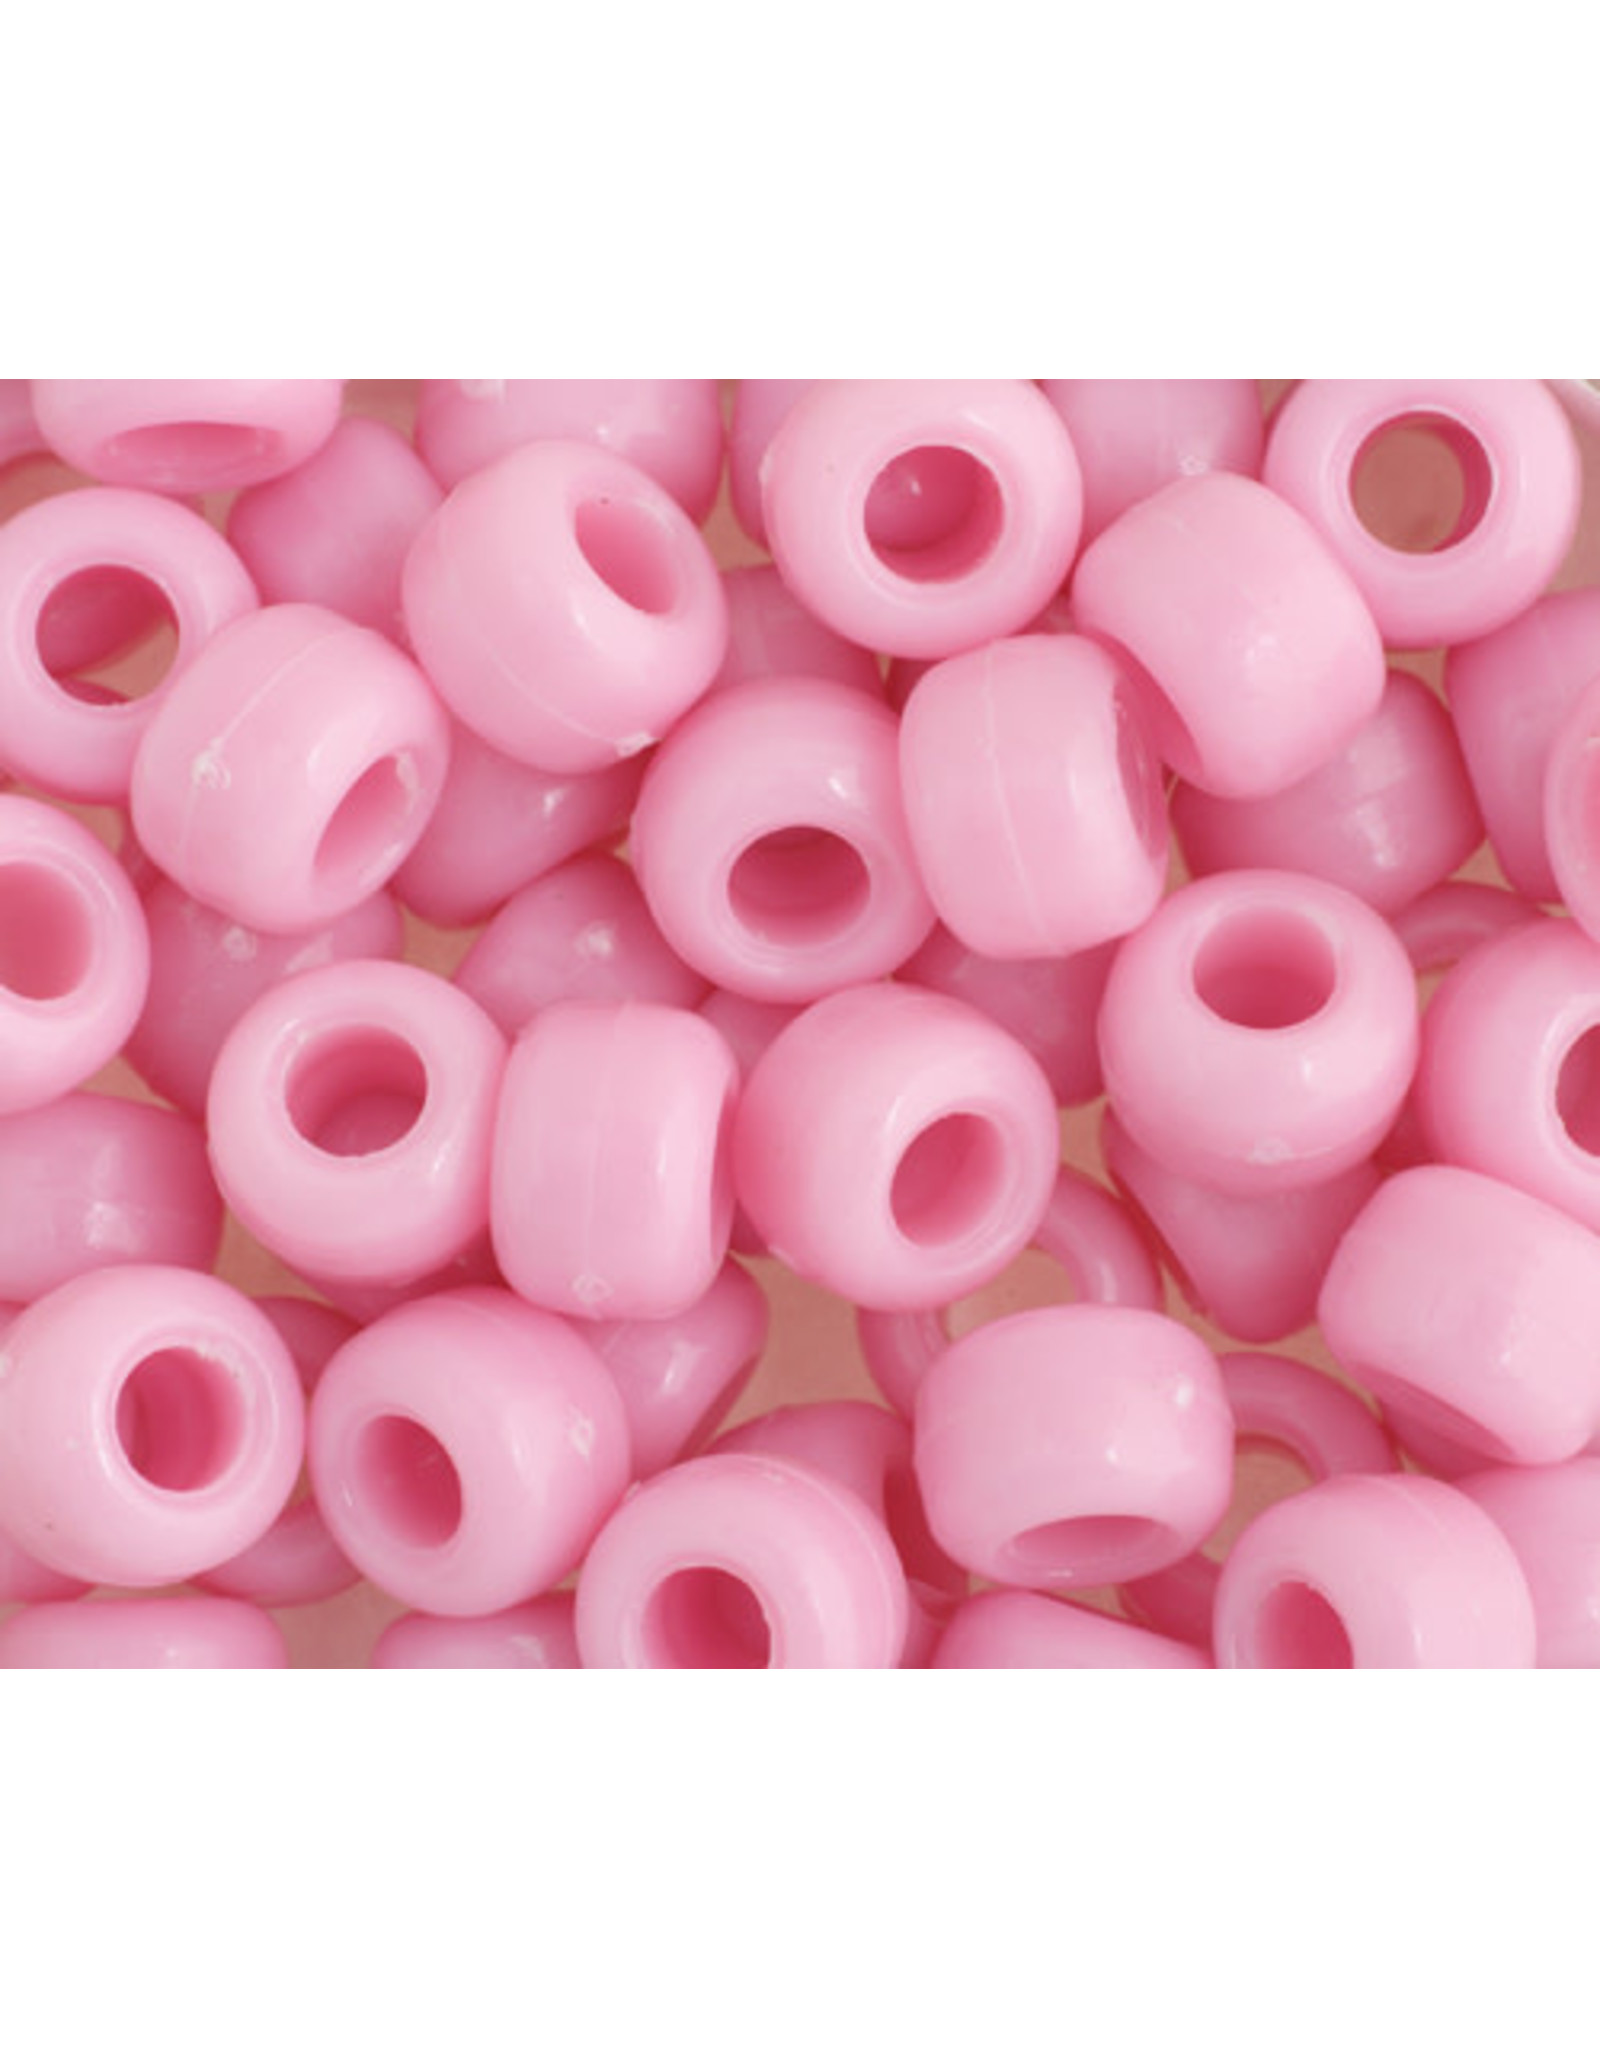 Crow Beads 9mm Opaque Pink x500